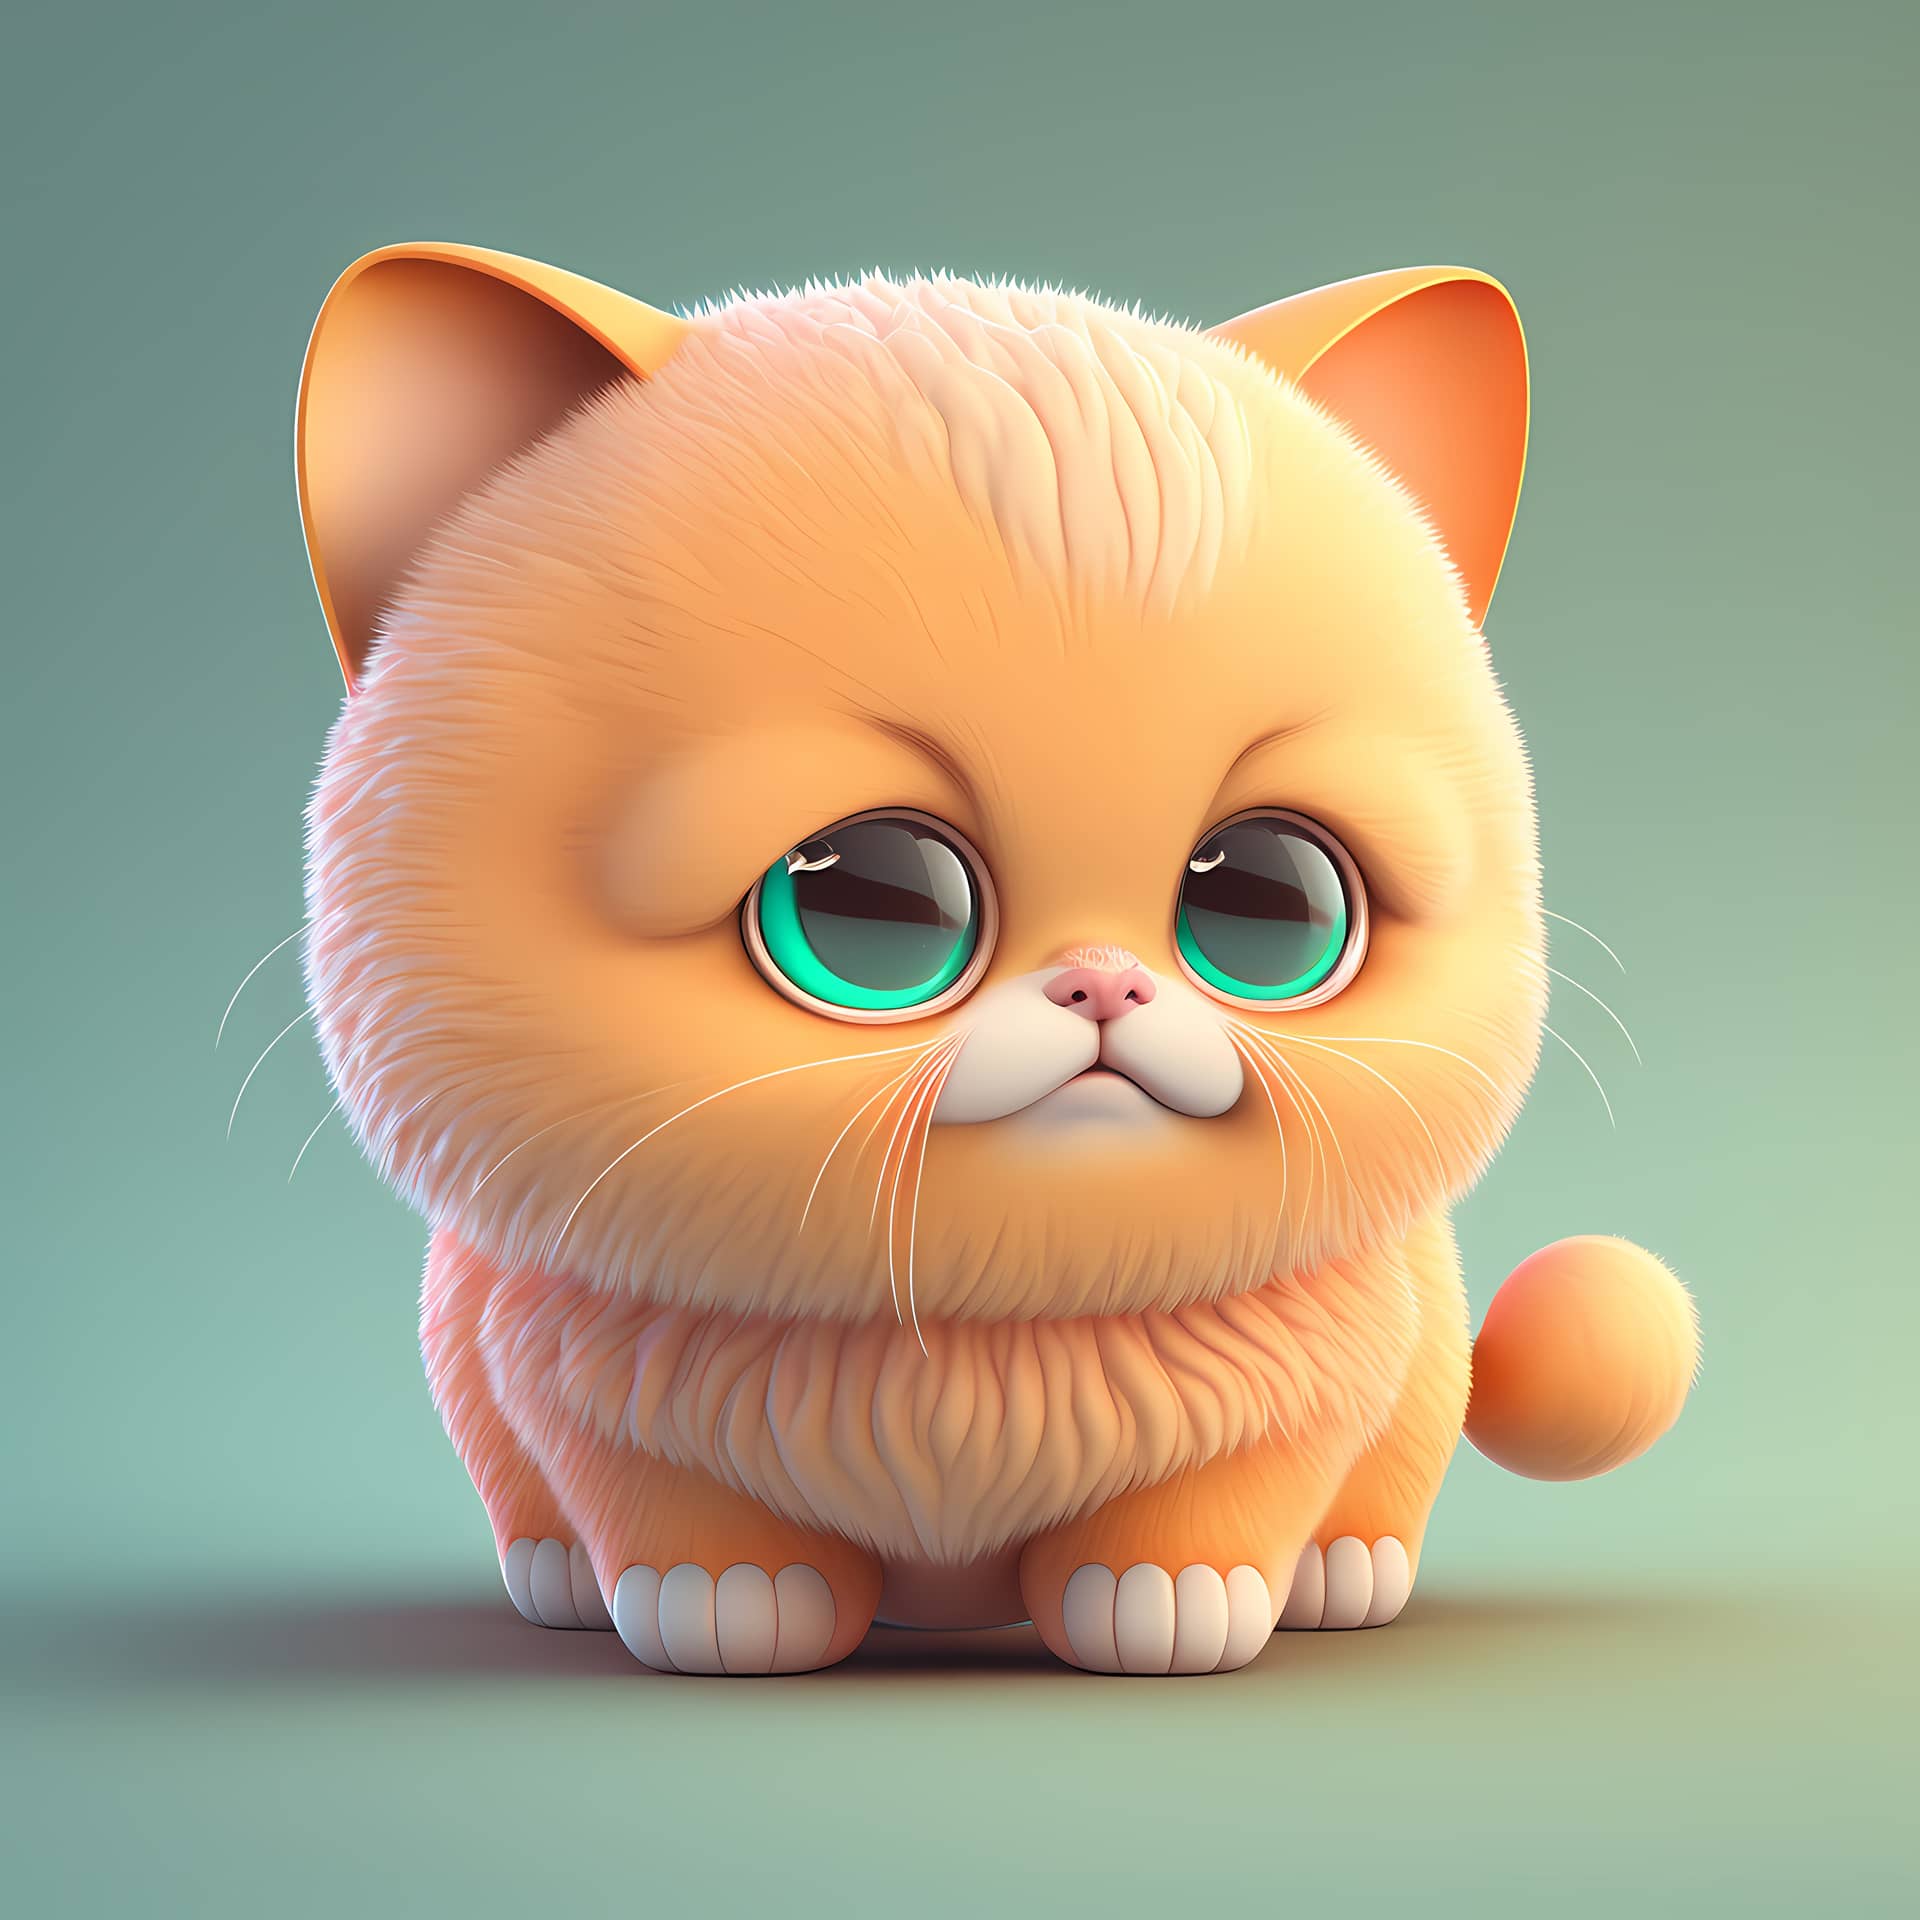 Adorable cute chubby cat 3d render realistic image